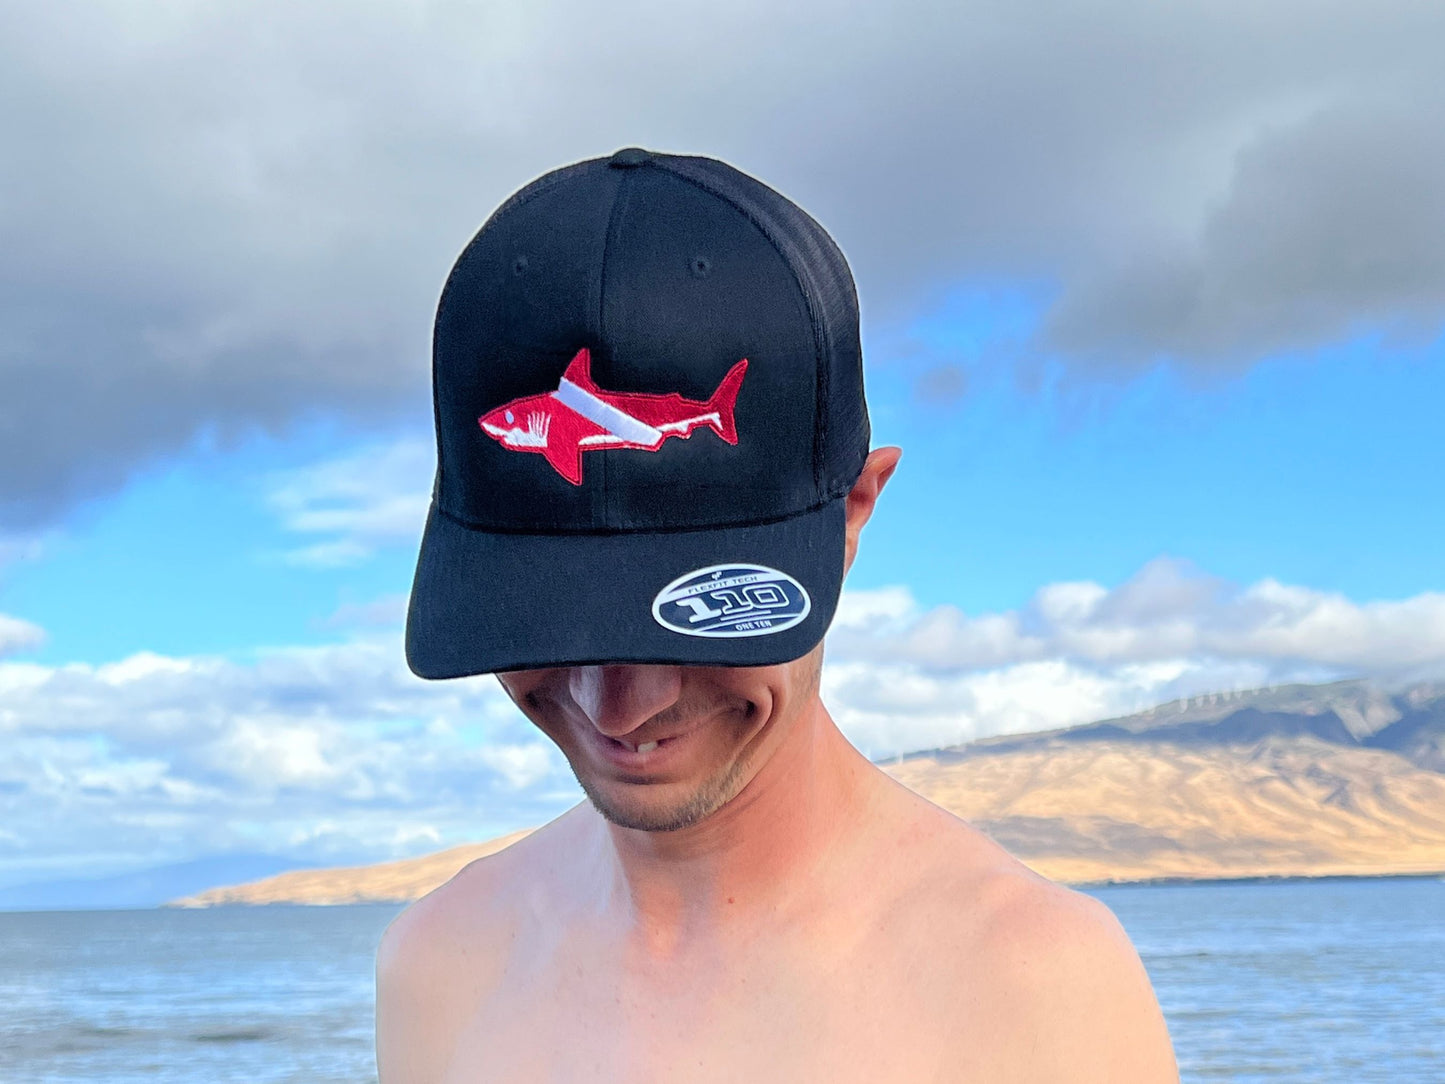 Dive Flag Shark Embroidered Baseball Cap | Adjustable Snap-back hat | Scuba Diver Gift | Diving Hat Made on Maui by Rinn Stitches Creative & Unique Embroidery